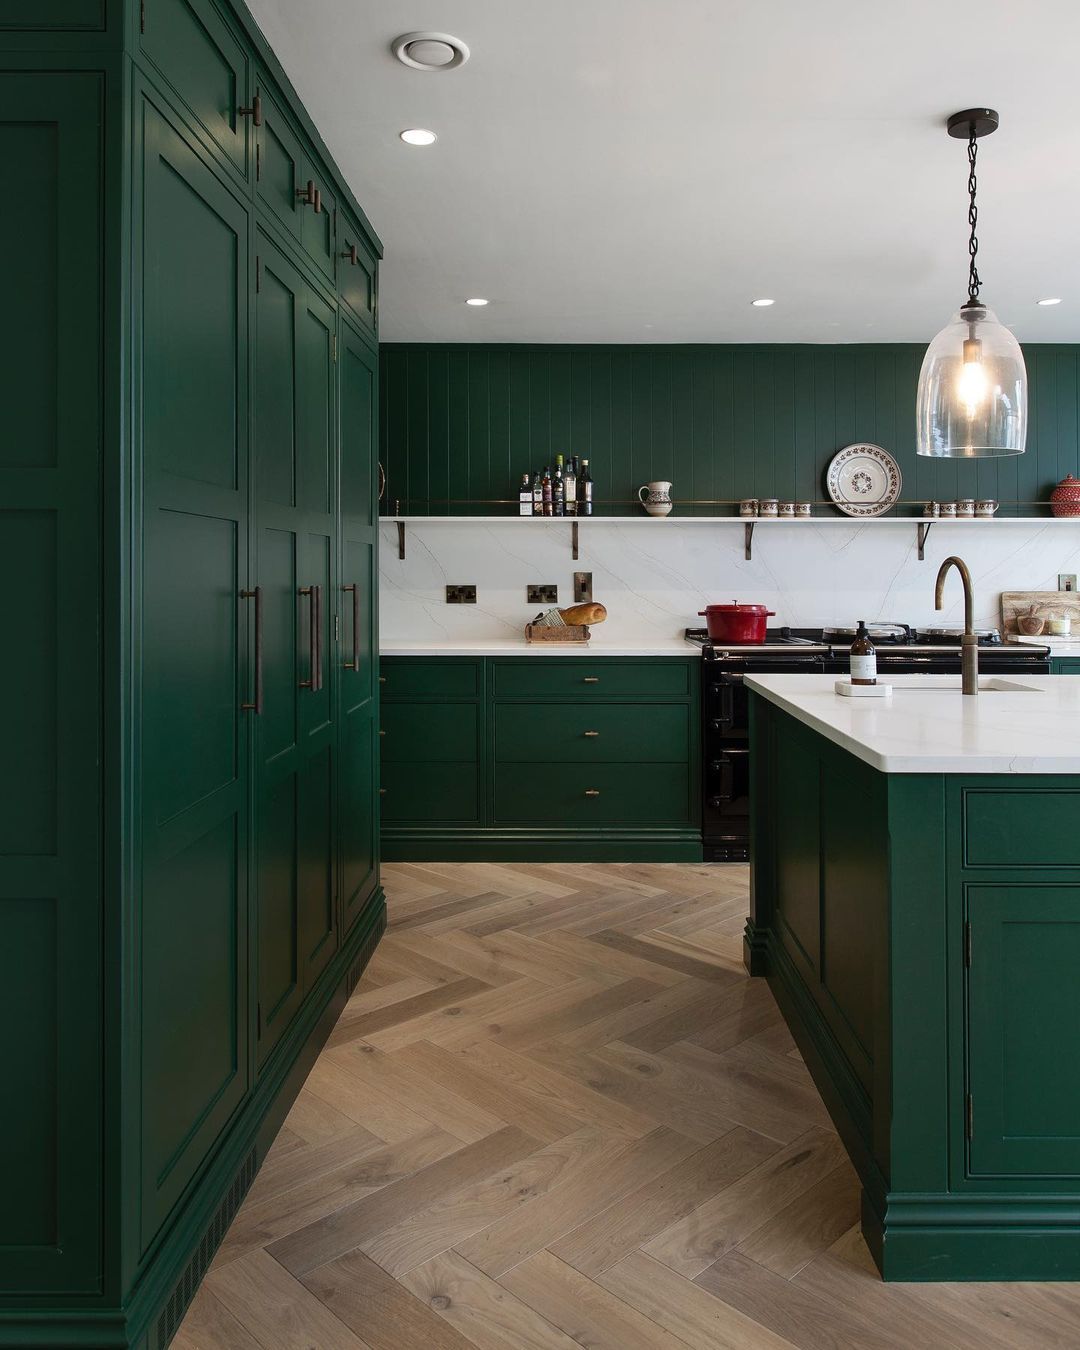 Introducing a stunning display of daring chromatic contrasts: a verdant green...